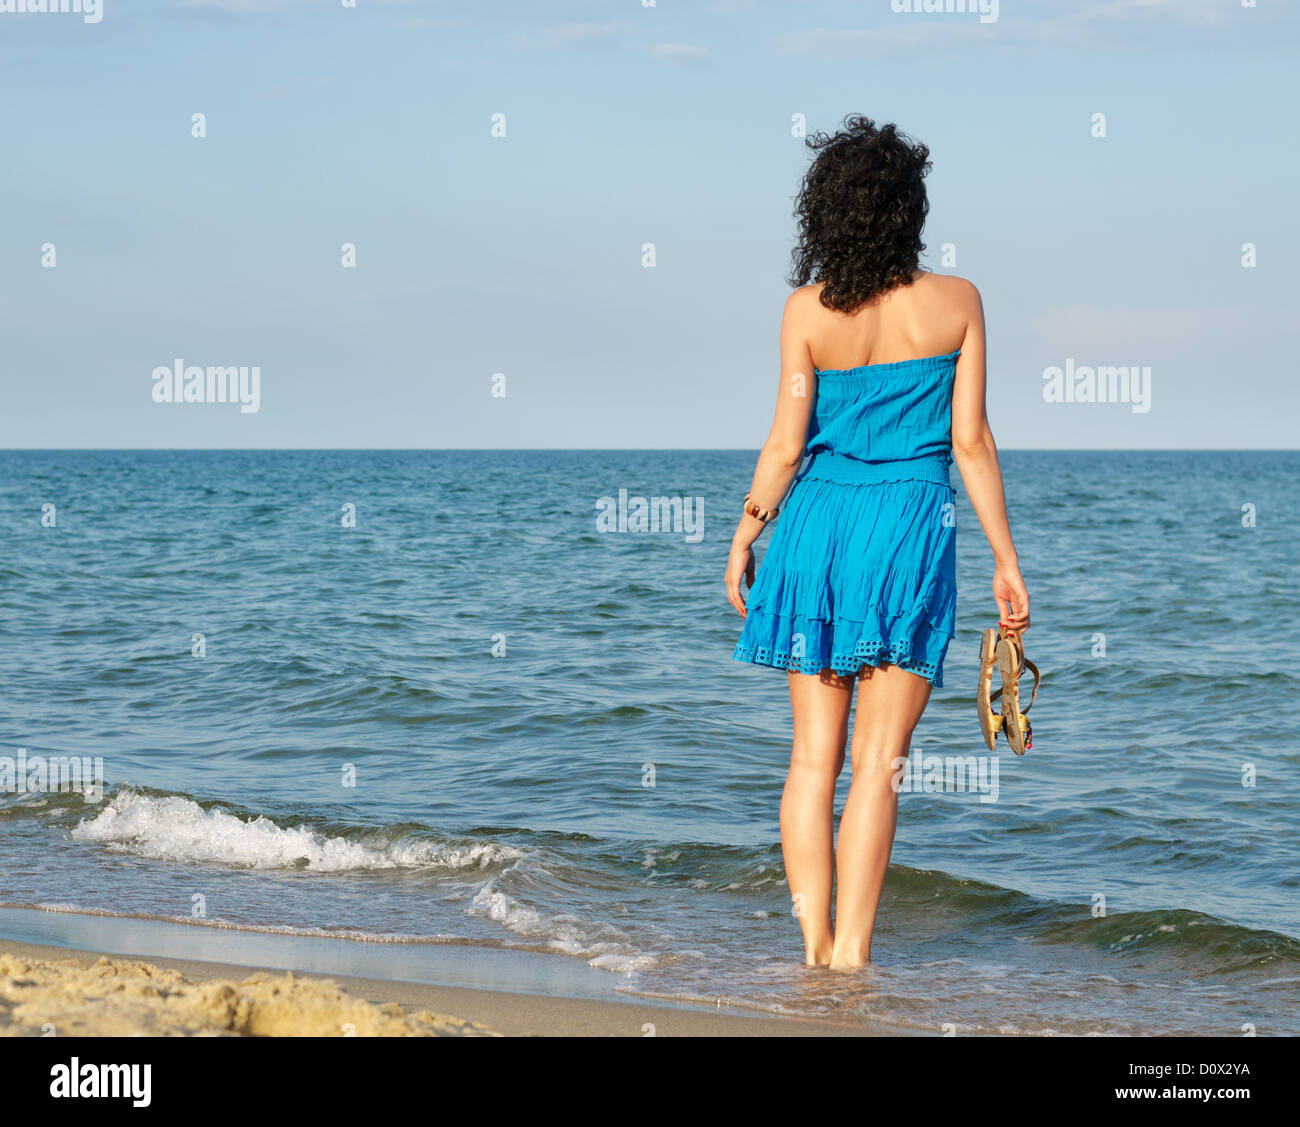 Woman in a blue summer dress standing holding her sandals in the shallow surf looking over ocean Stock Photo